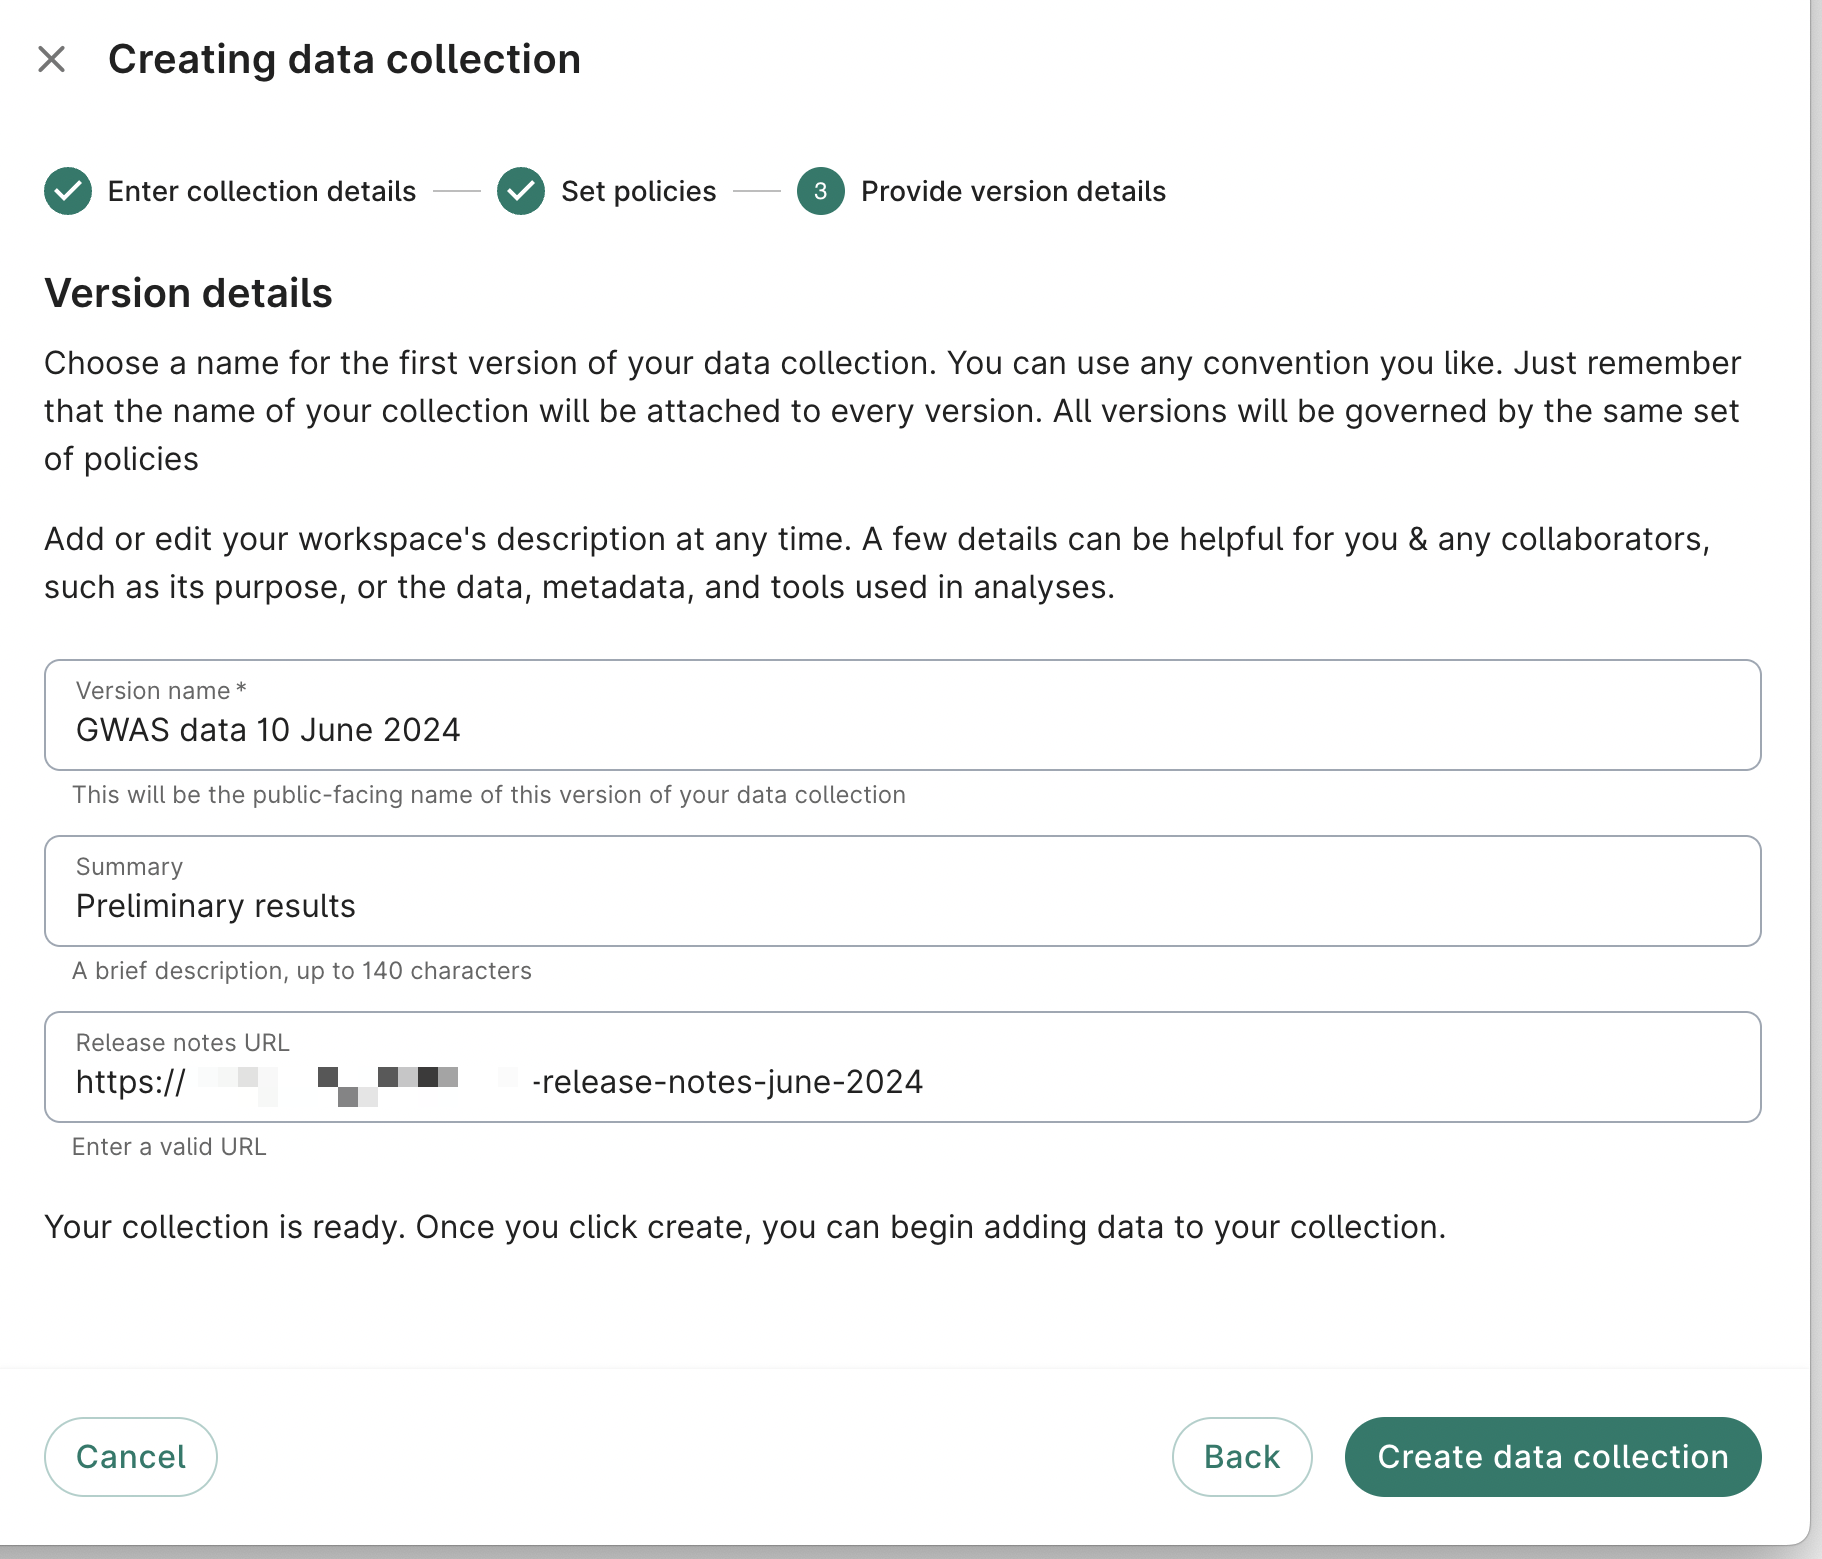 Screenshot of Provide version details dialog, the last step when creating a data collection.